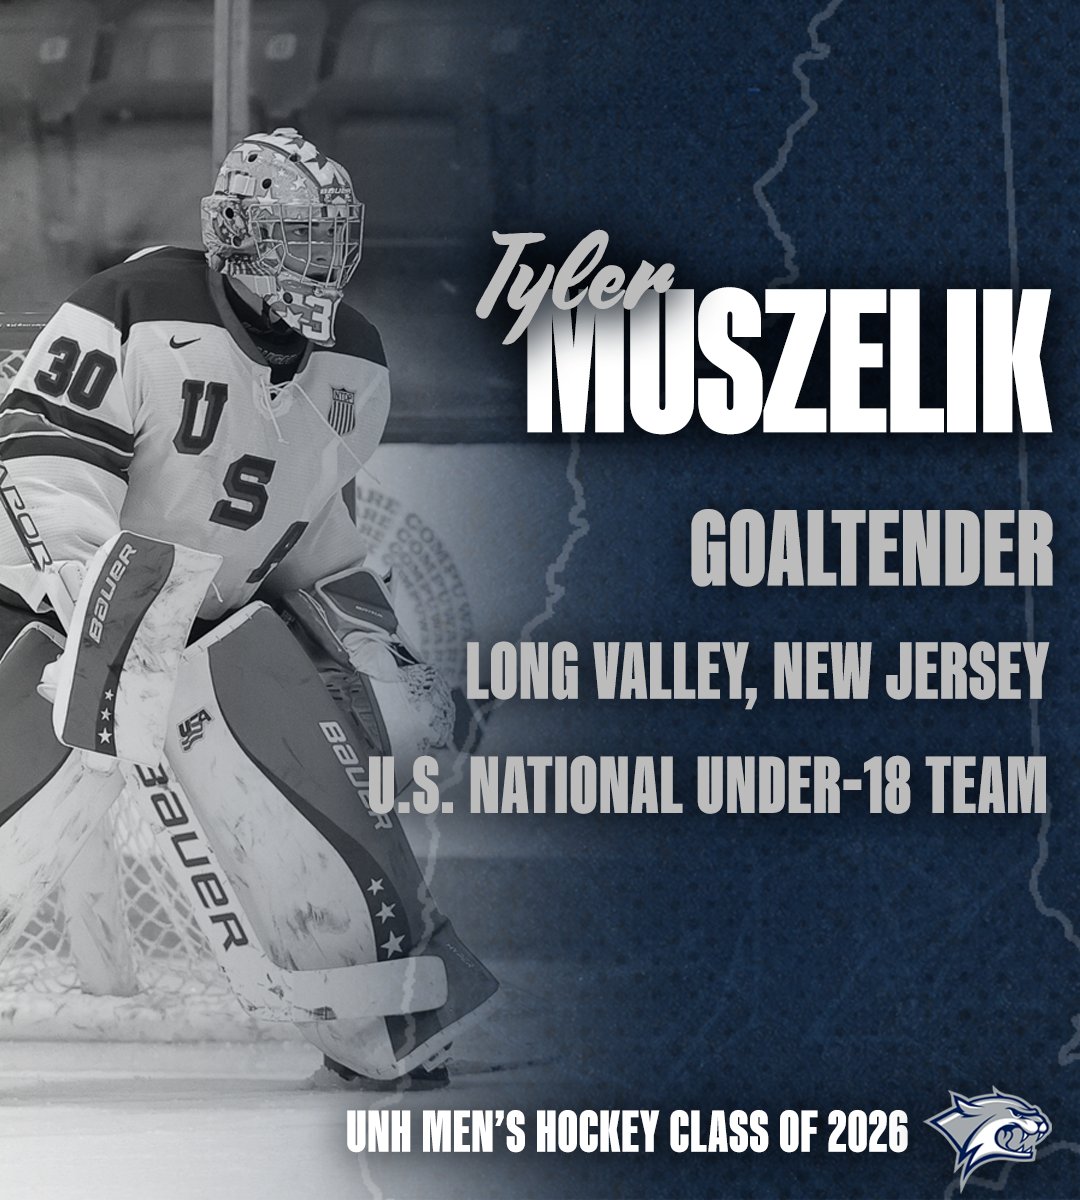 Tyler Muszelik was selected in the 6th round with the 189th overall pick in the 2022 NHL Draft by the Florida Panthers. He posted a record of 24-5-3 with the U.S. National Under-18 Team in 2021-22. Story ➡️ bit.ly/3dSVq6n #BeTheRoar